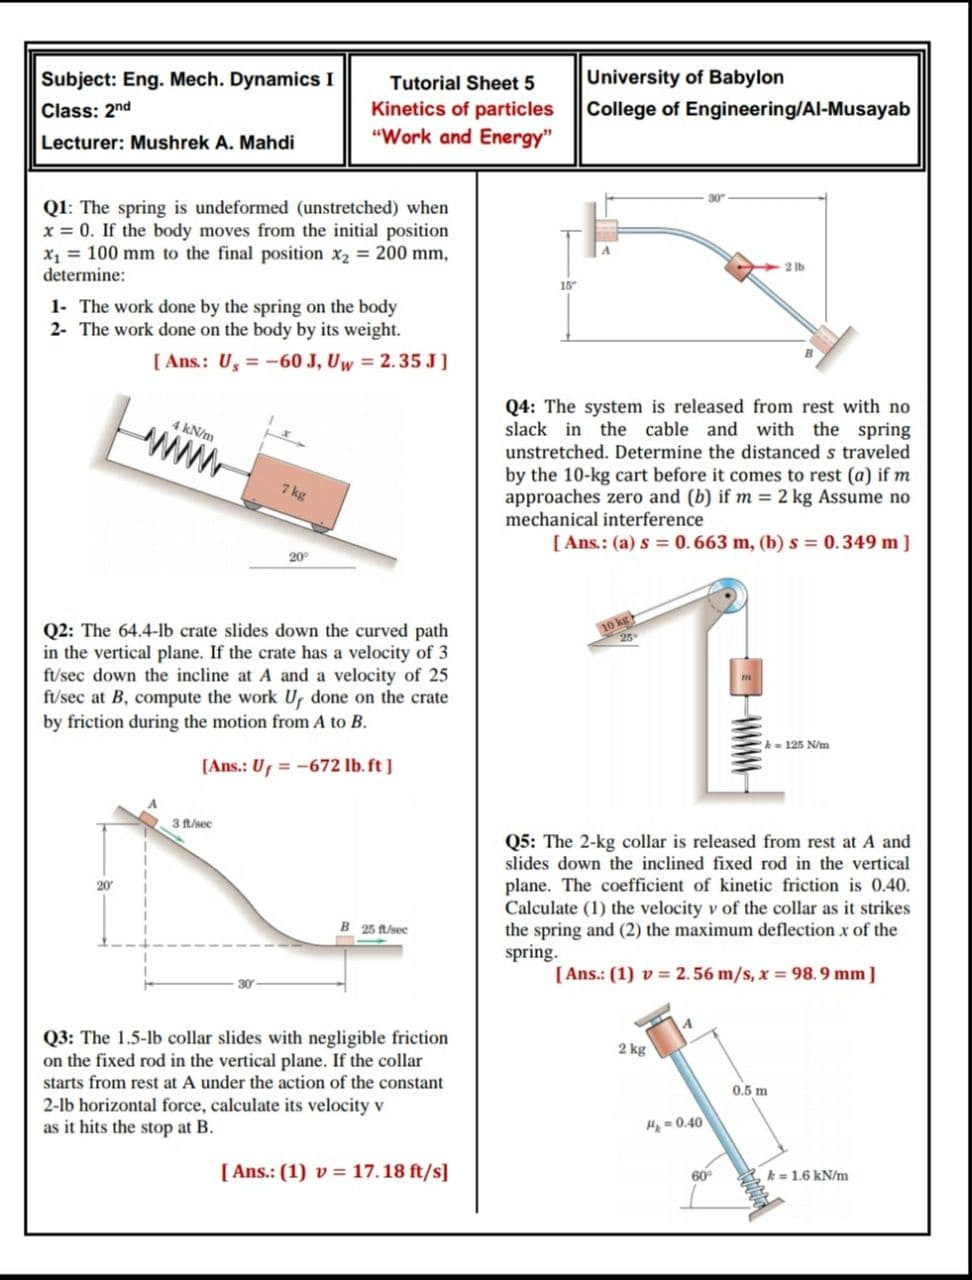 Subject: Eng. Mech. Dynamics I
Tutorial Sheet 5
University of Babylon
Kinetics of particles
"Work and Energy"
Class: 2nd
College of Engineering/Al-Musayab
Lecturer: Mushrek A. Mahdi
30
Q1: The spring is undeformed (unstretched) when
x = 0. If the body moves from the initial position
x, = 100 mm to the final position x2 = 200 mm,
determine:
2 lb
15
1- The work done by the spring on the body
2- The work done on the body by its weight.
[ Ans.: U, = -60 J, Uw = 2.35 J]
Q4: The system is released from rest with no
slack in the cable and with the spring
4 kN/m
www
unstretched. Determine the distanced s traveled
by the 10-kg cart before it comes to rest (a) if m
approaches zero and (b) if m = 2 kg Assume no
mechanical interference
7 kg
[ Ans.: (a) s = 0. 663 m, (b) s = 0.349 m]
20
10 kg
25
Q2: The 64.4-lb crate slides down the curved path
in the vertical plane. If the crate has a velocity of 3
ft/sec down the incline at A and a velocity of 25
ft/sec at B, compute the work U, done on the crate
by friction during the motion from A to B.
k = 125 N/m
[Ans.: Uf =-672 lb. ft ]
3 ft/sec
Q5: The 2-kg collar is released from rest at A and
slides down the inclined fixed rod in the vertical
plane. The coefficient of kinetic friction is 0.40.
Calculate (1) the velocity v of the collar as it strikes
the spring and (2) the maximum deflection x of the
spring.
20
B 25 ft/sec
[ Ans.: (1) v = 2.56 m/s, x = 98.9 mm]
Q3: The 1.5-lb collar slides with negligible friction
on the fixed rod in the vertical plane. If the collar
2 kg
starts from rest at A under the action of the constant
0.5 m
2-lb horizontal force, calculate its velocity v
as it hits the stop at B.
Hp =0.40
[ Ans.: (1) v = 17. 18 ft/s]
k = 1.6 kN/m
60
